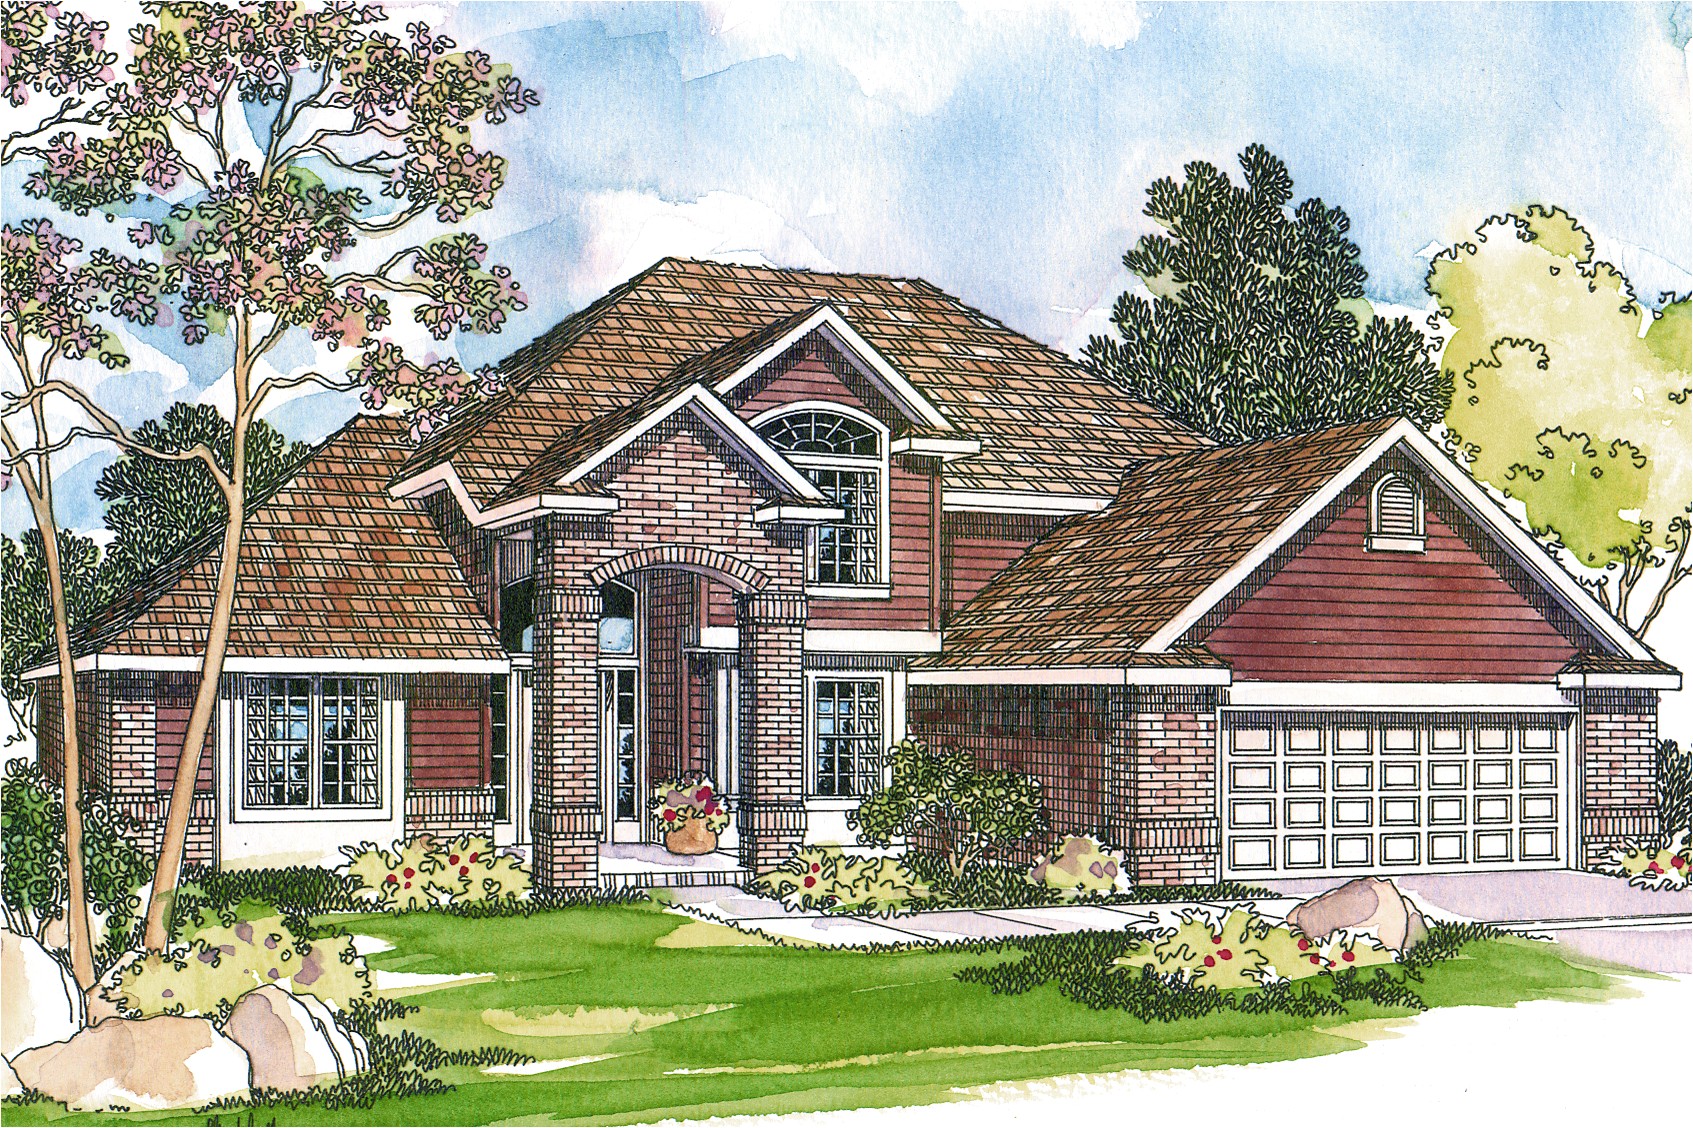 Traditional Home Plans with Photo Traditional House Plans Coleridge 30 251 associated